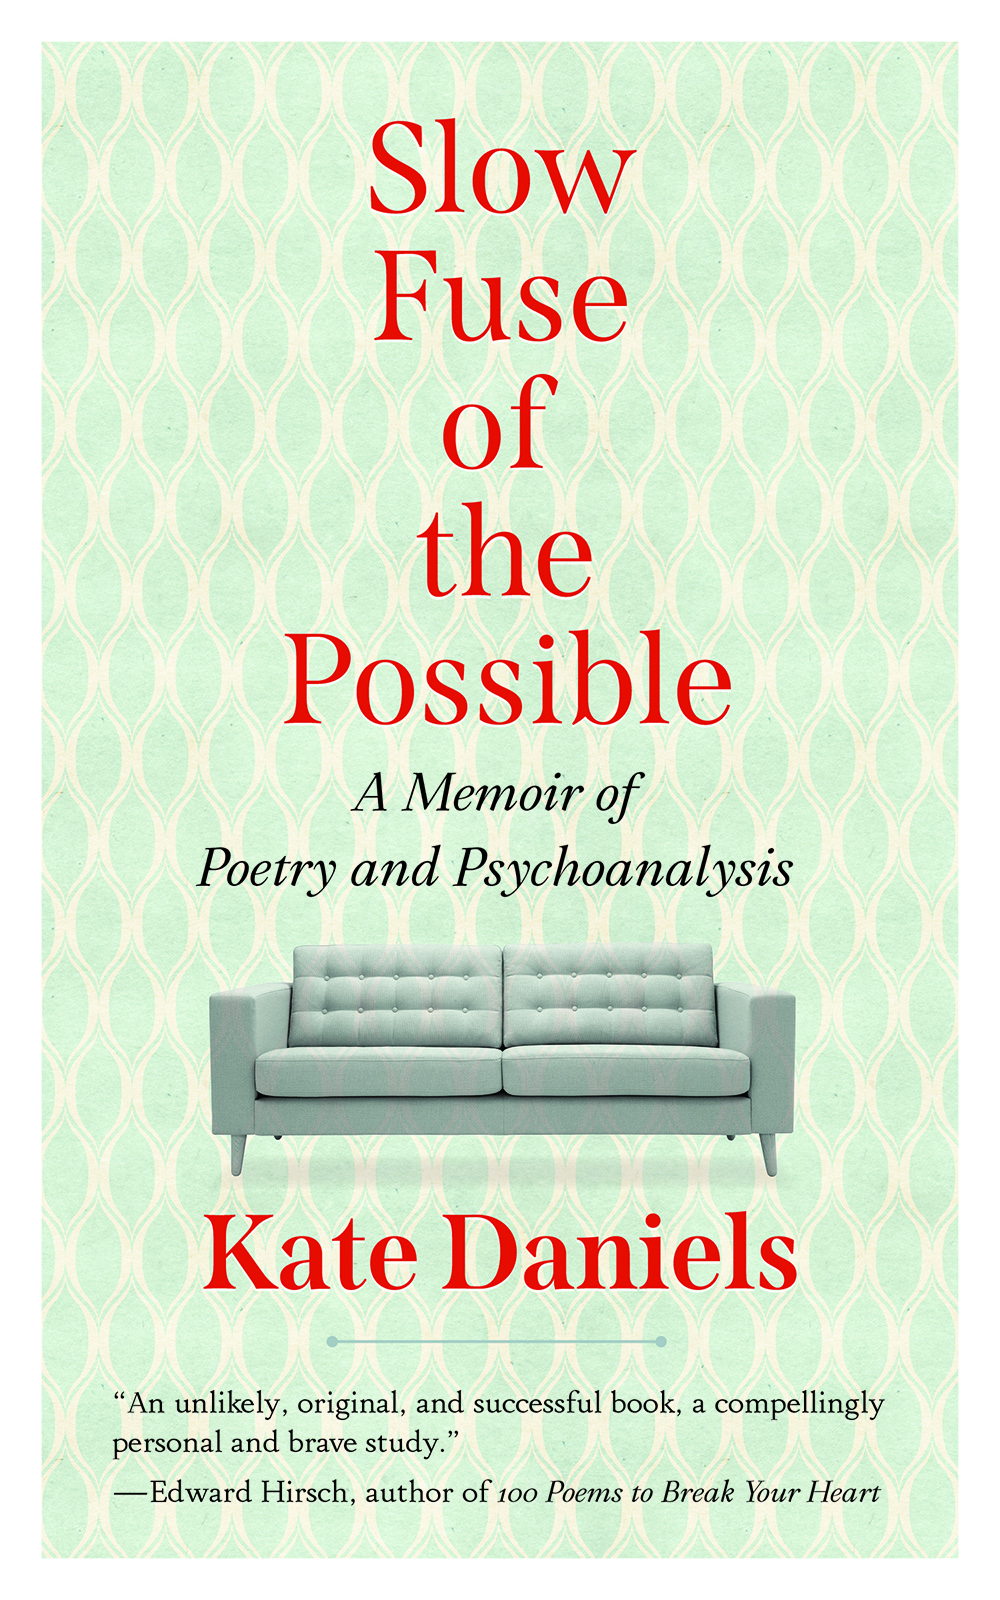 Book Cover of Kate Daniels Slow Fuse of the Possible